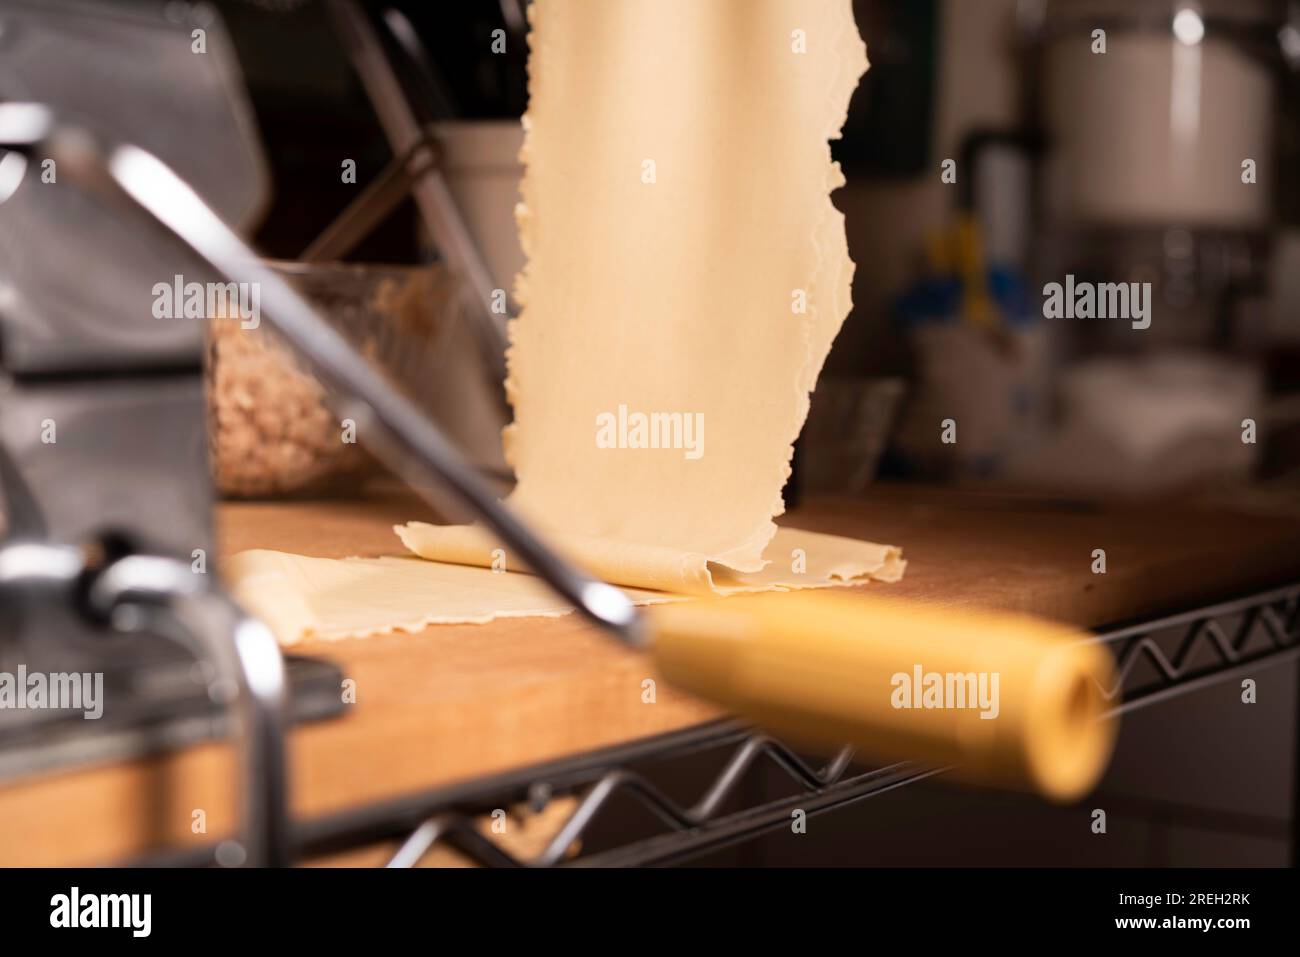 https://c8.alamy.com/comp/2REH2RK/making-pasta-and-tortellini-at-home-on-wooden-rack-and-chrome-pasta-maker-2REH2RK.jpg